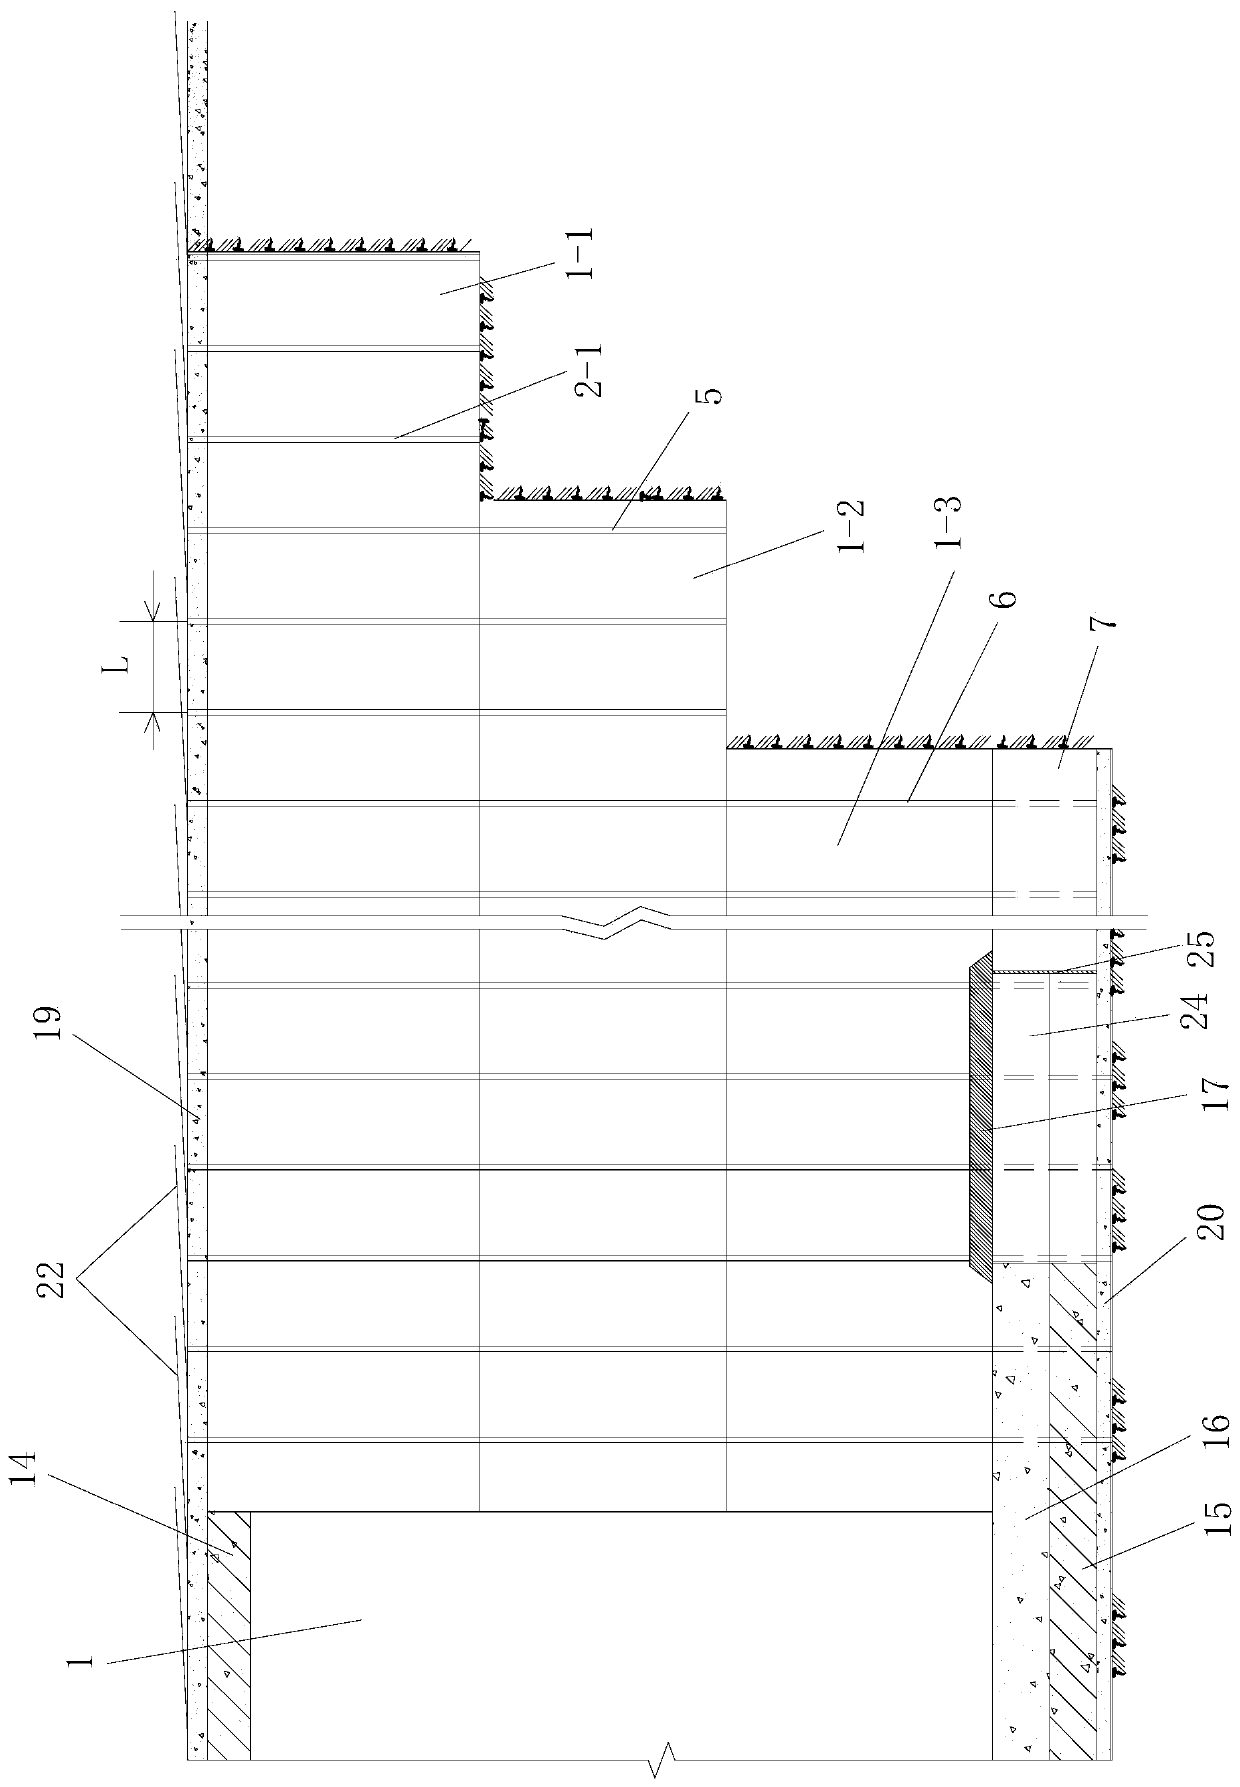 Deep-buried loess tunnel deformation control construction structure based on cover arch and method